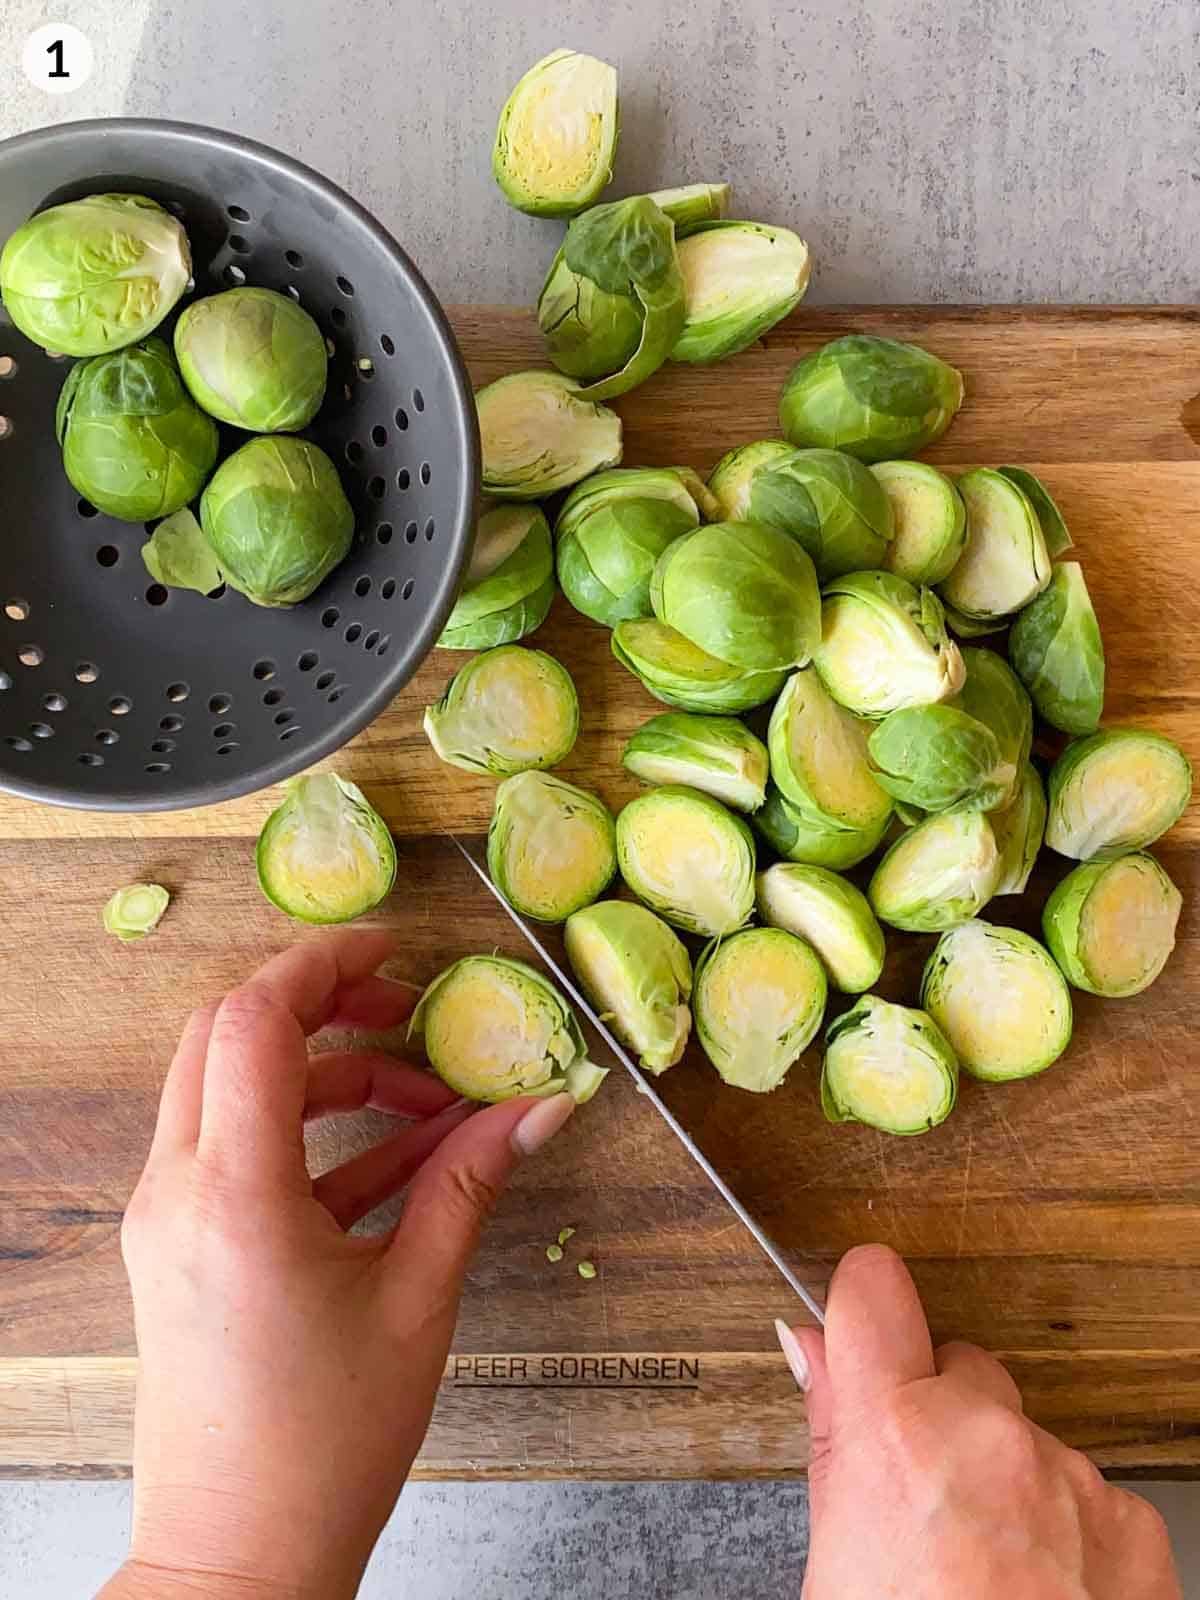 Cutting Brussels sprouts in half on a wooden chopping board with a knife